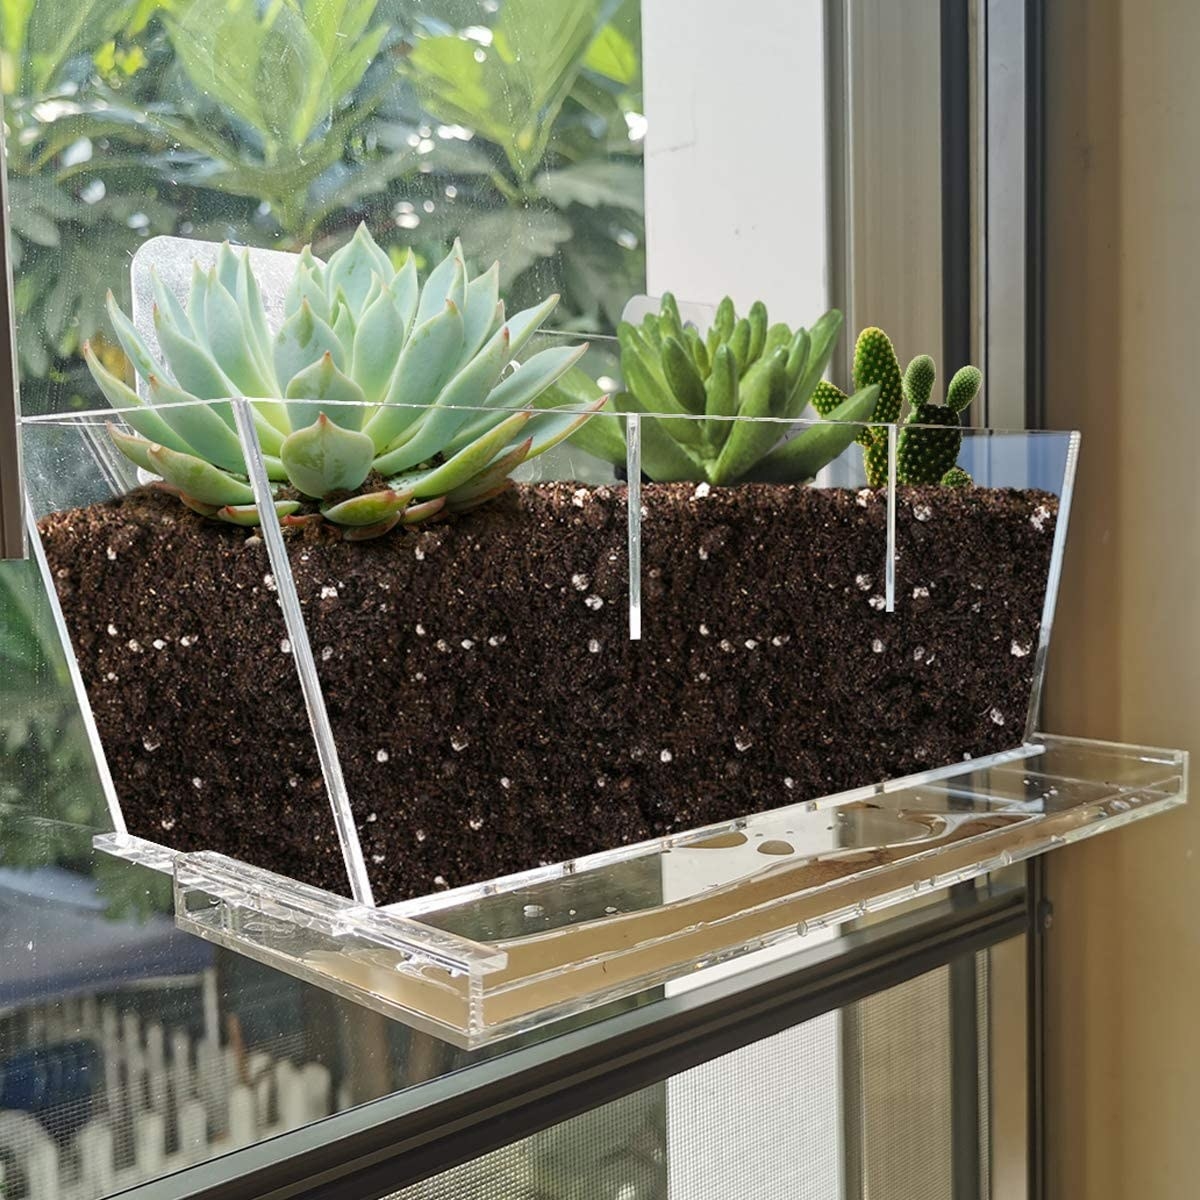 A transparent planter mounted on a window 